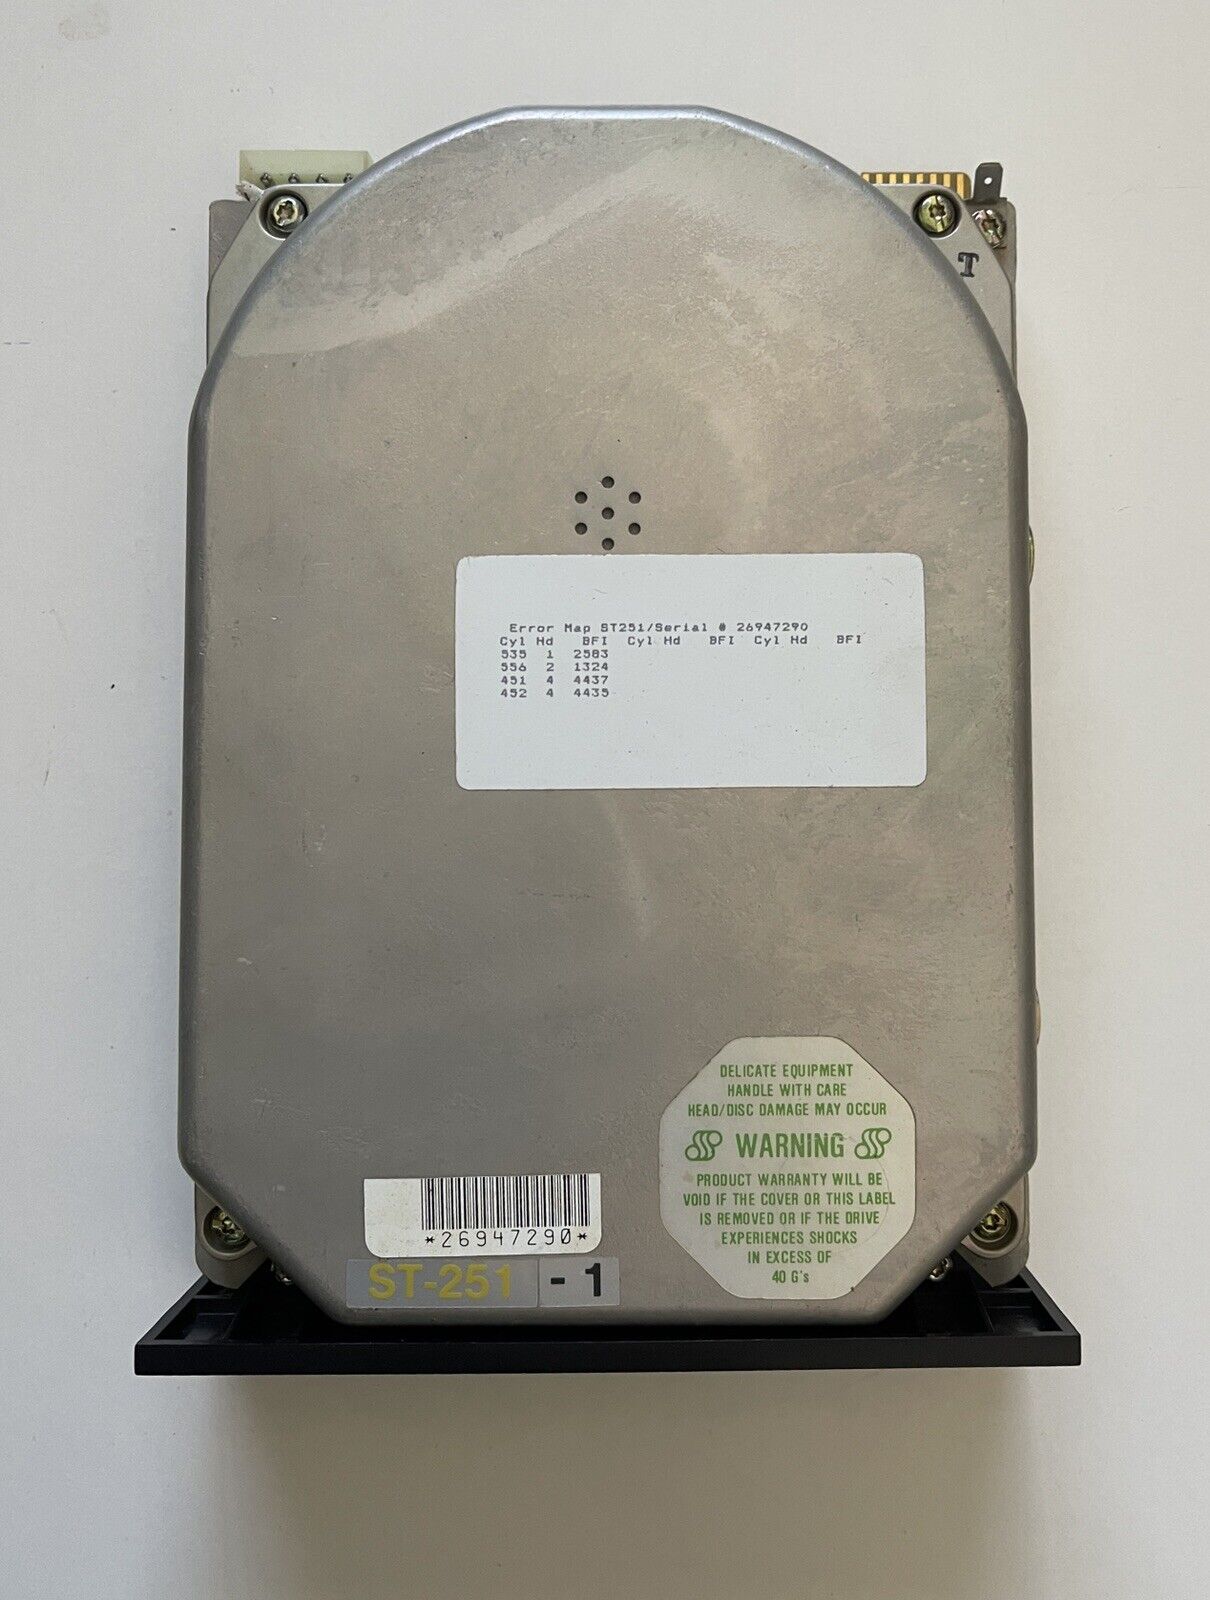 Seagate Vintage  ST251-1 5.25IN MFM 50MB Hard Drive. Used